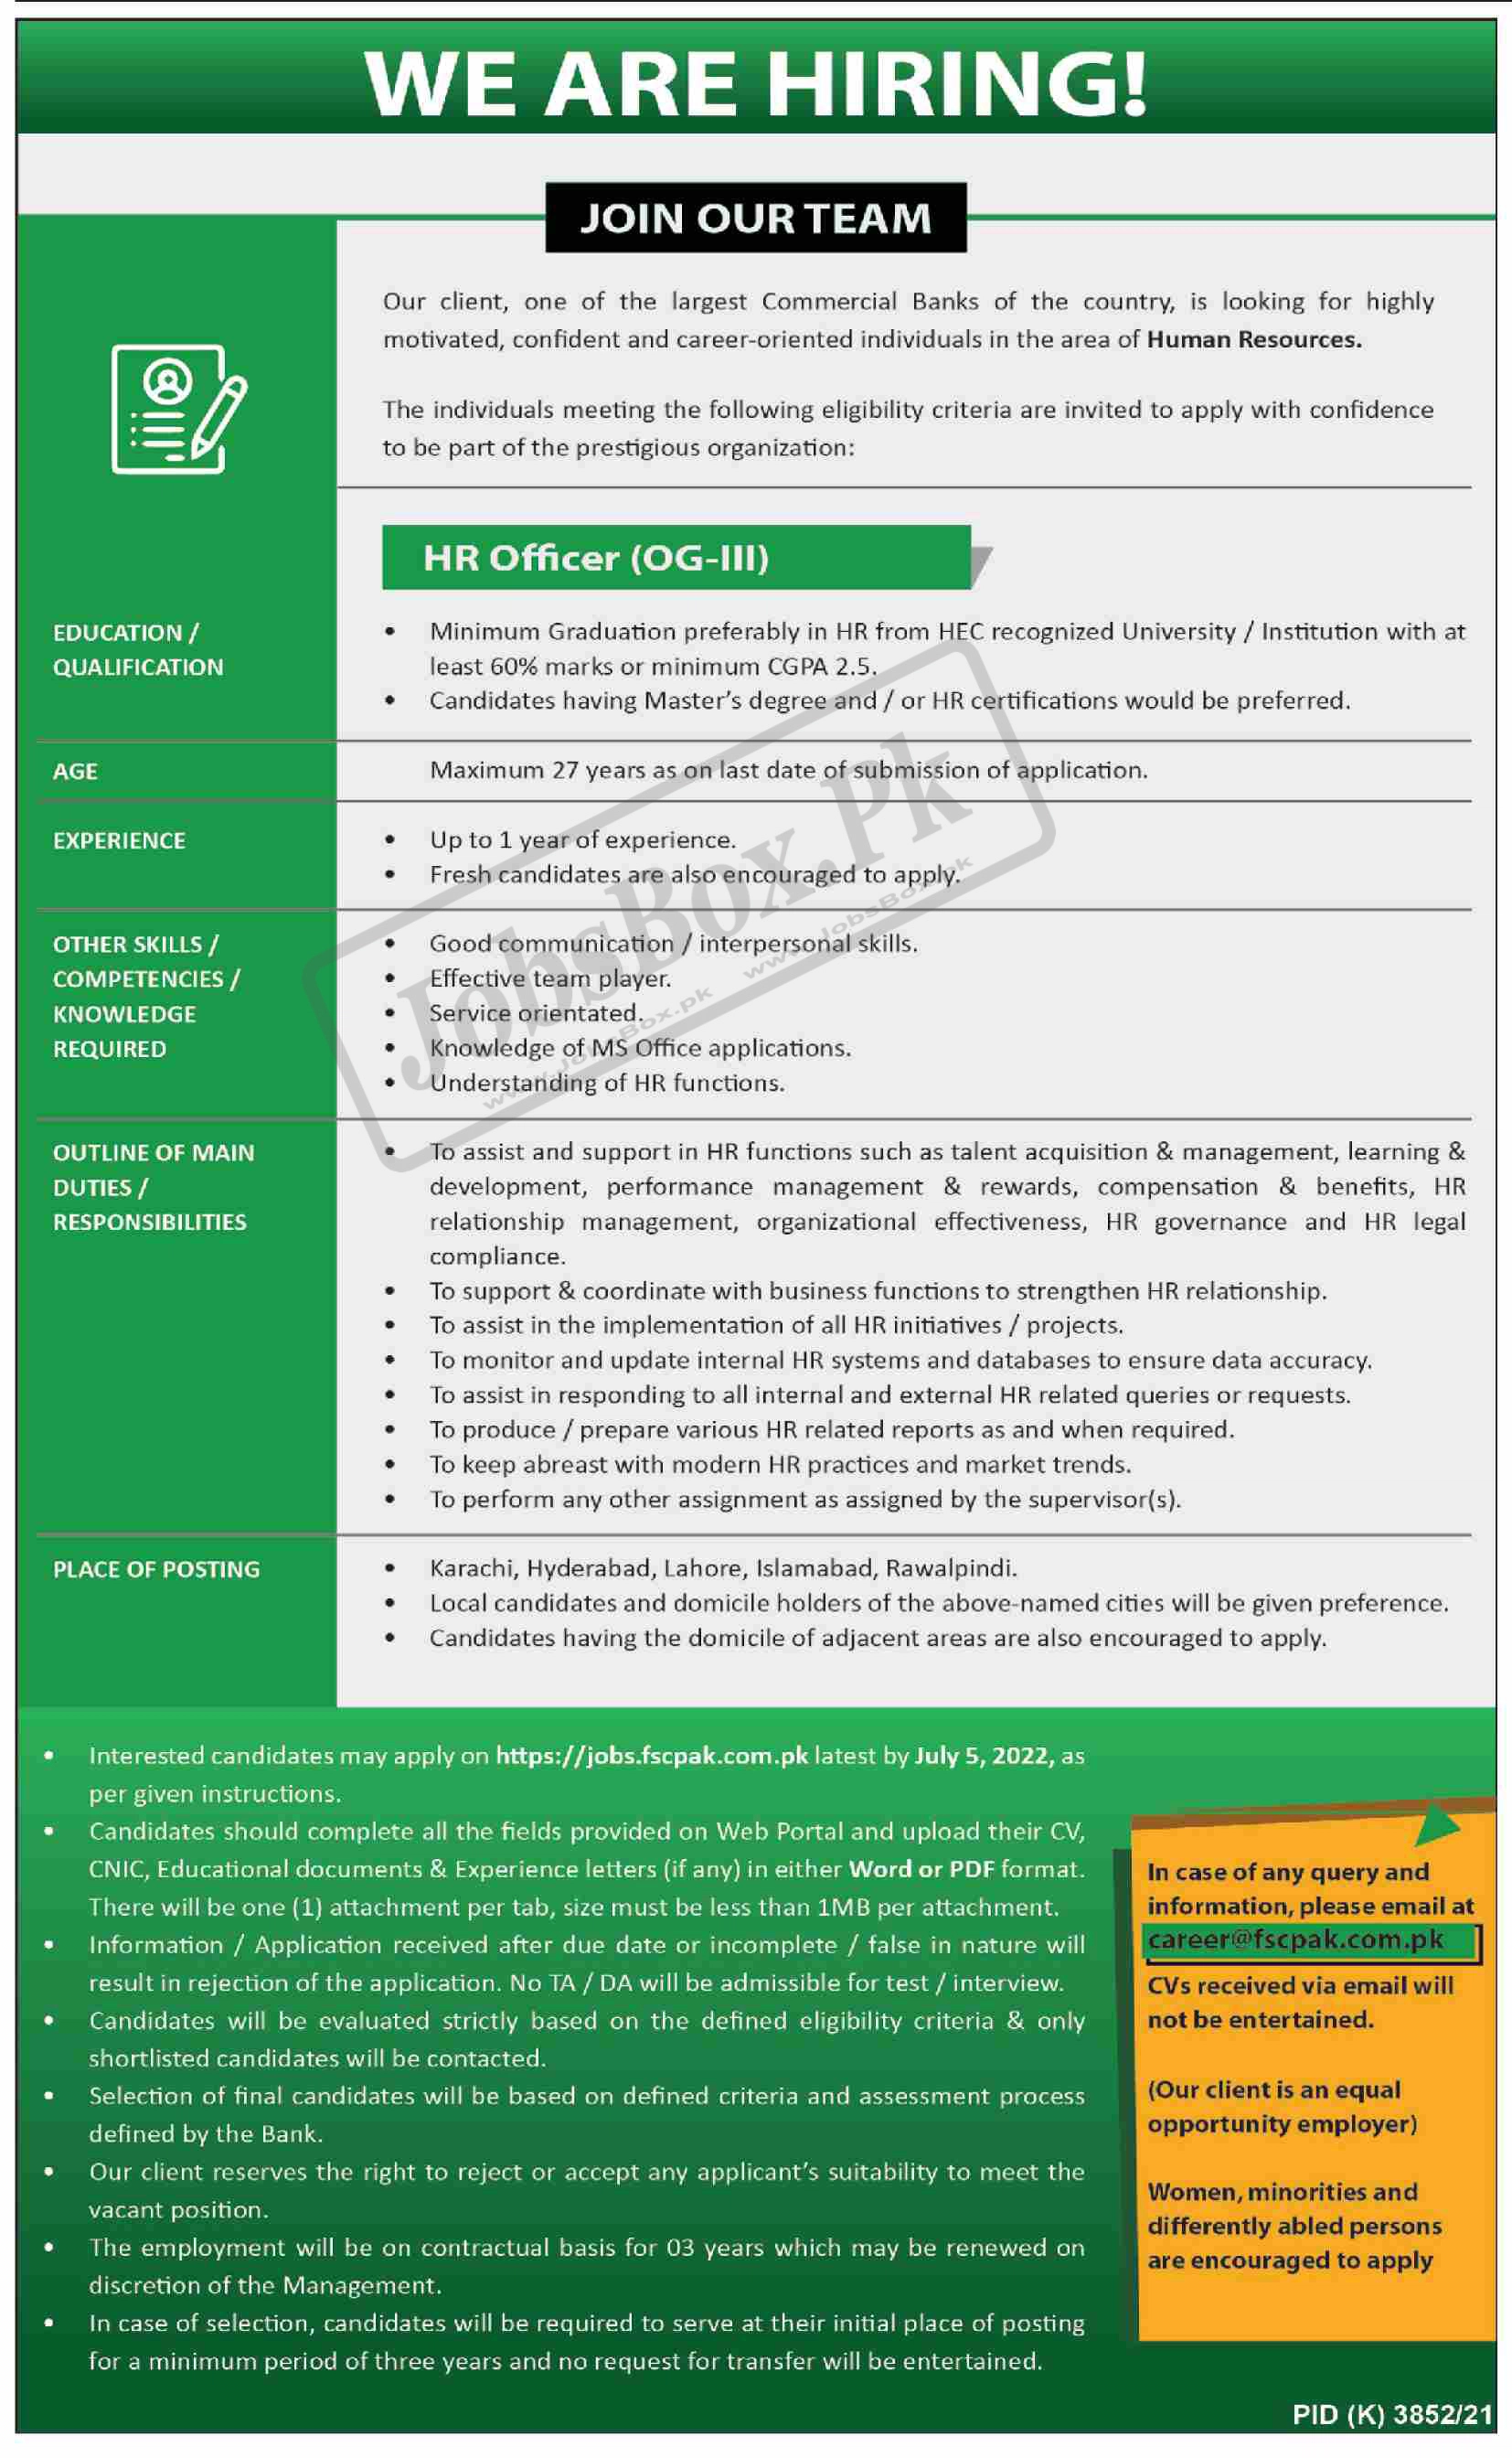 Banking Jobs 2022 in Pakistan Current Openings - Fill Online Form Today